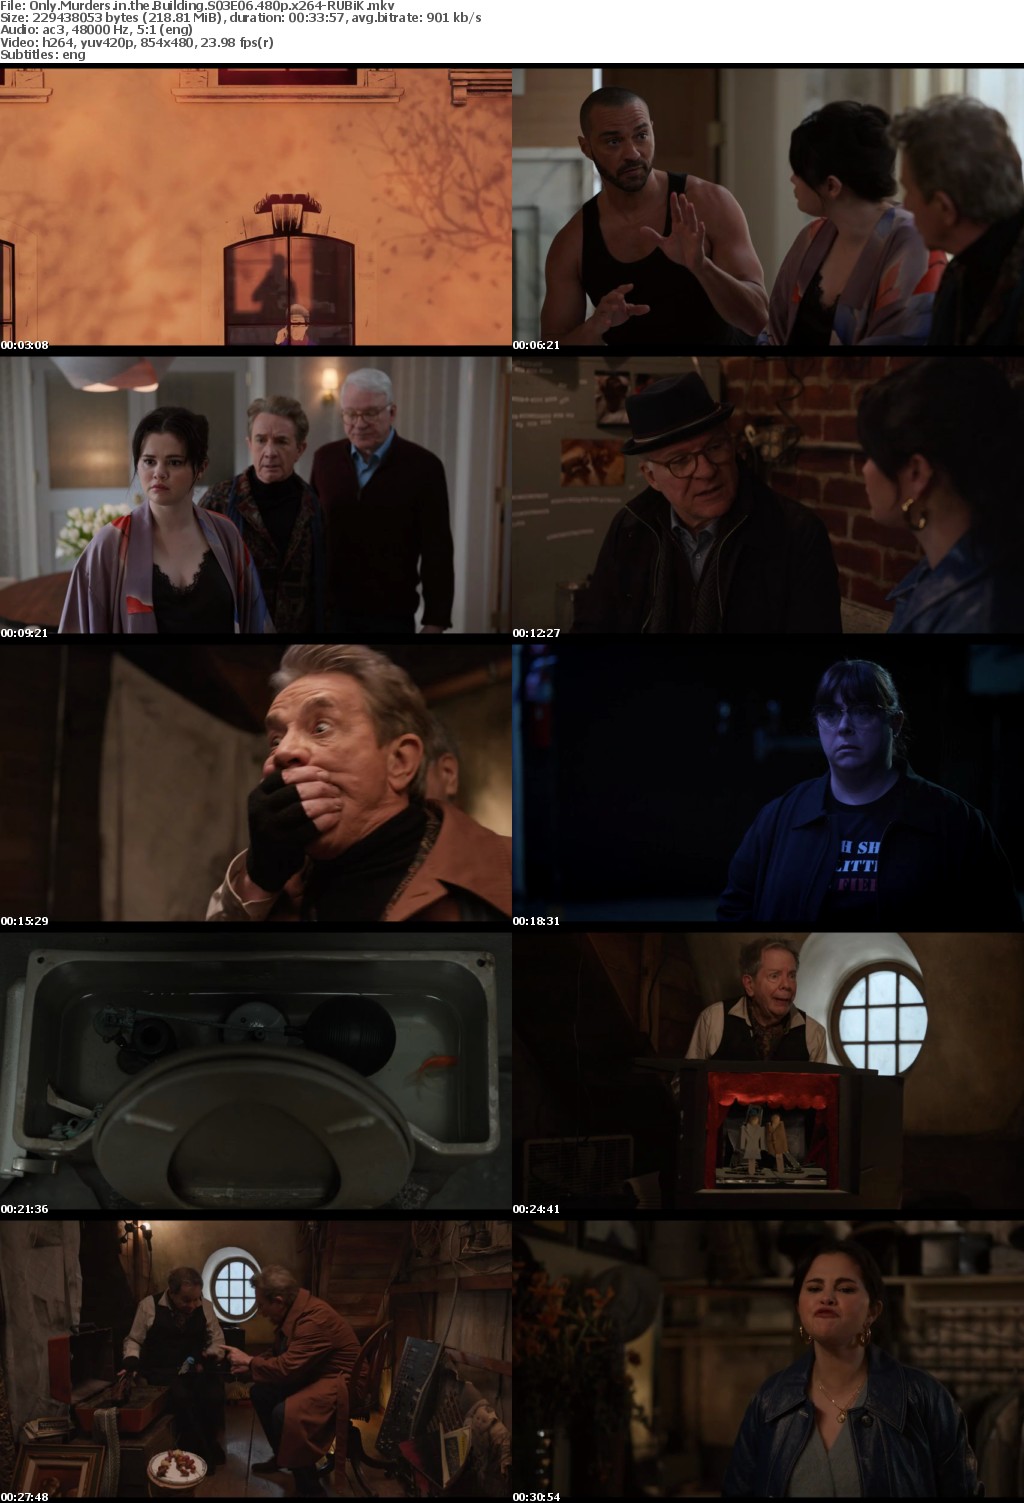 Only Murders in the Building S03 480p x264-RUBiK